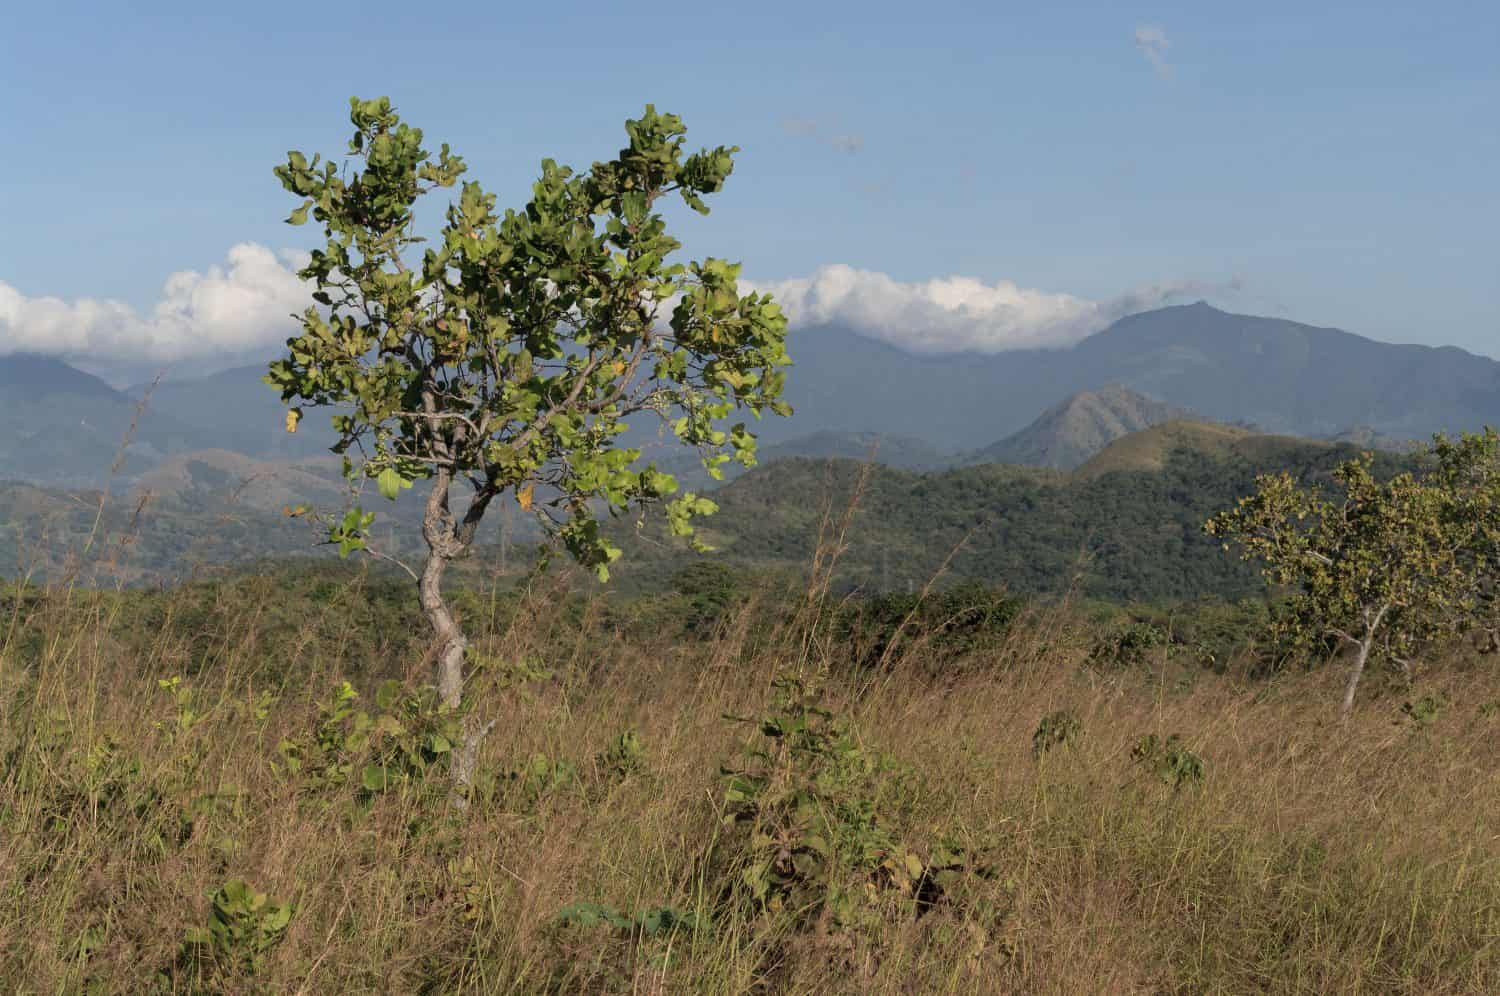 Image taken in western Panama showing a Curatella americana tree in the foreground. The plant is known as 'chumico in Panama.